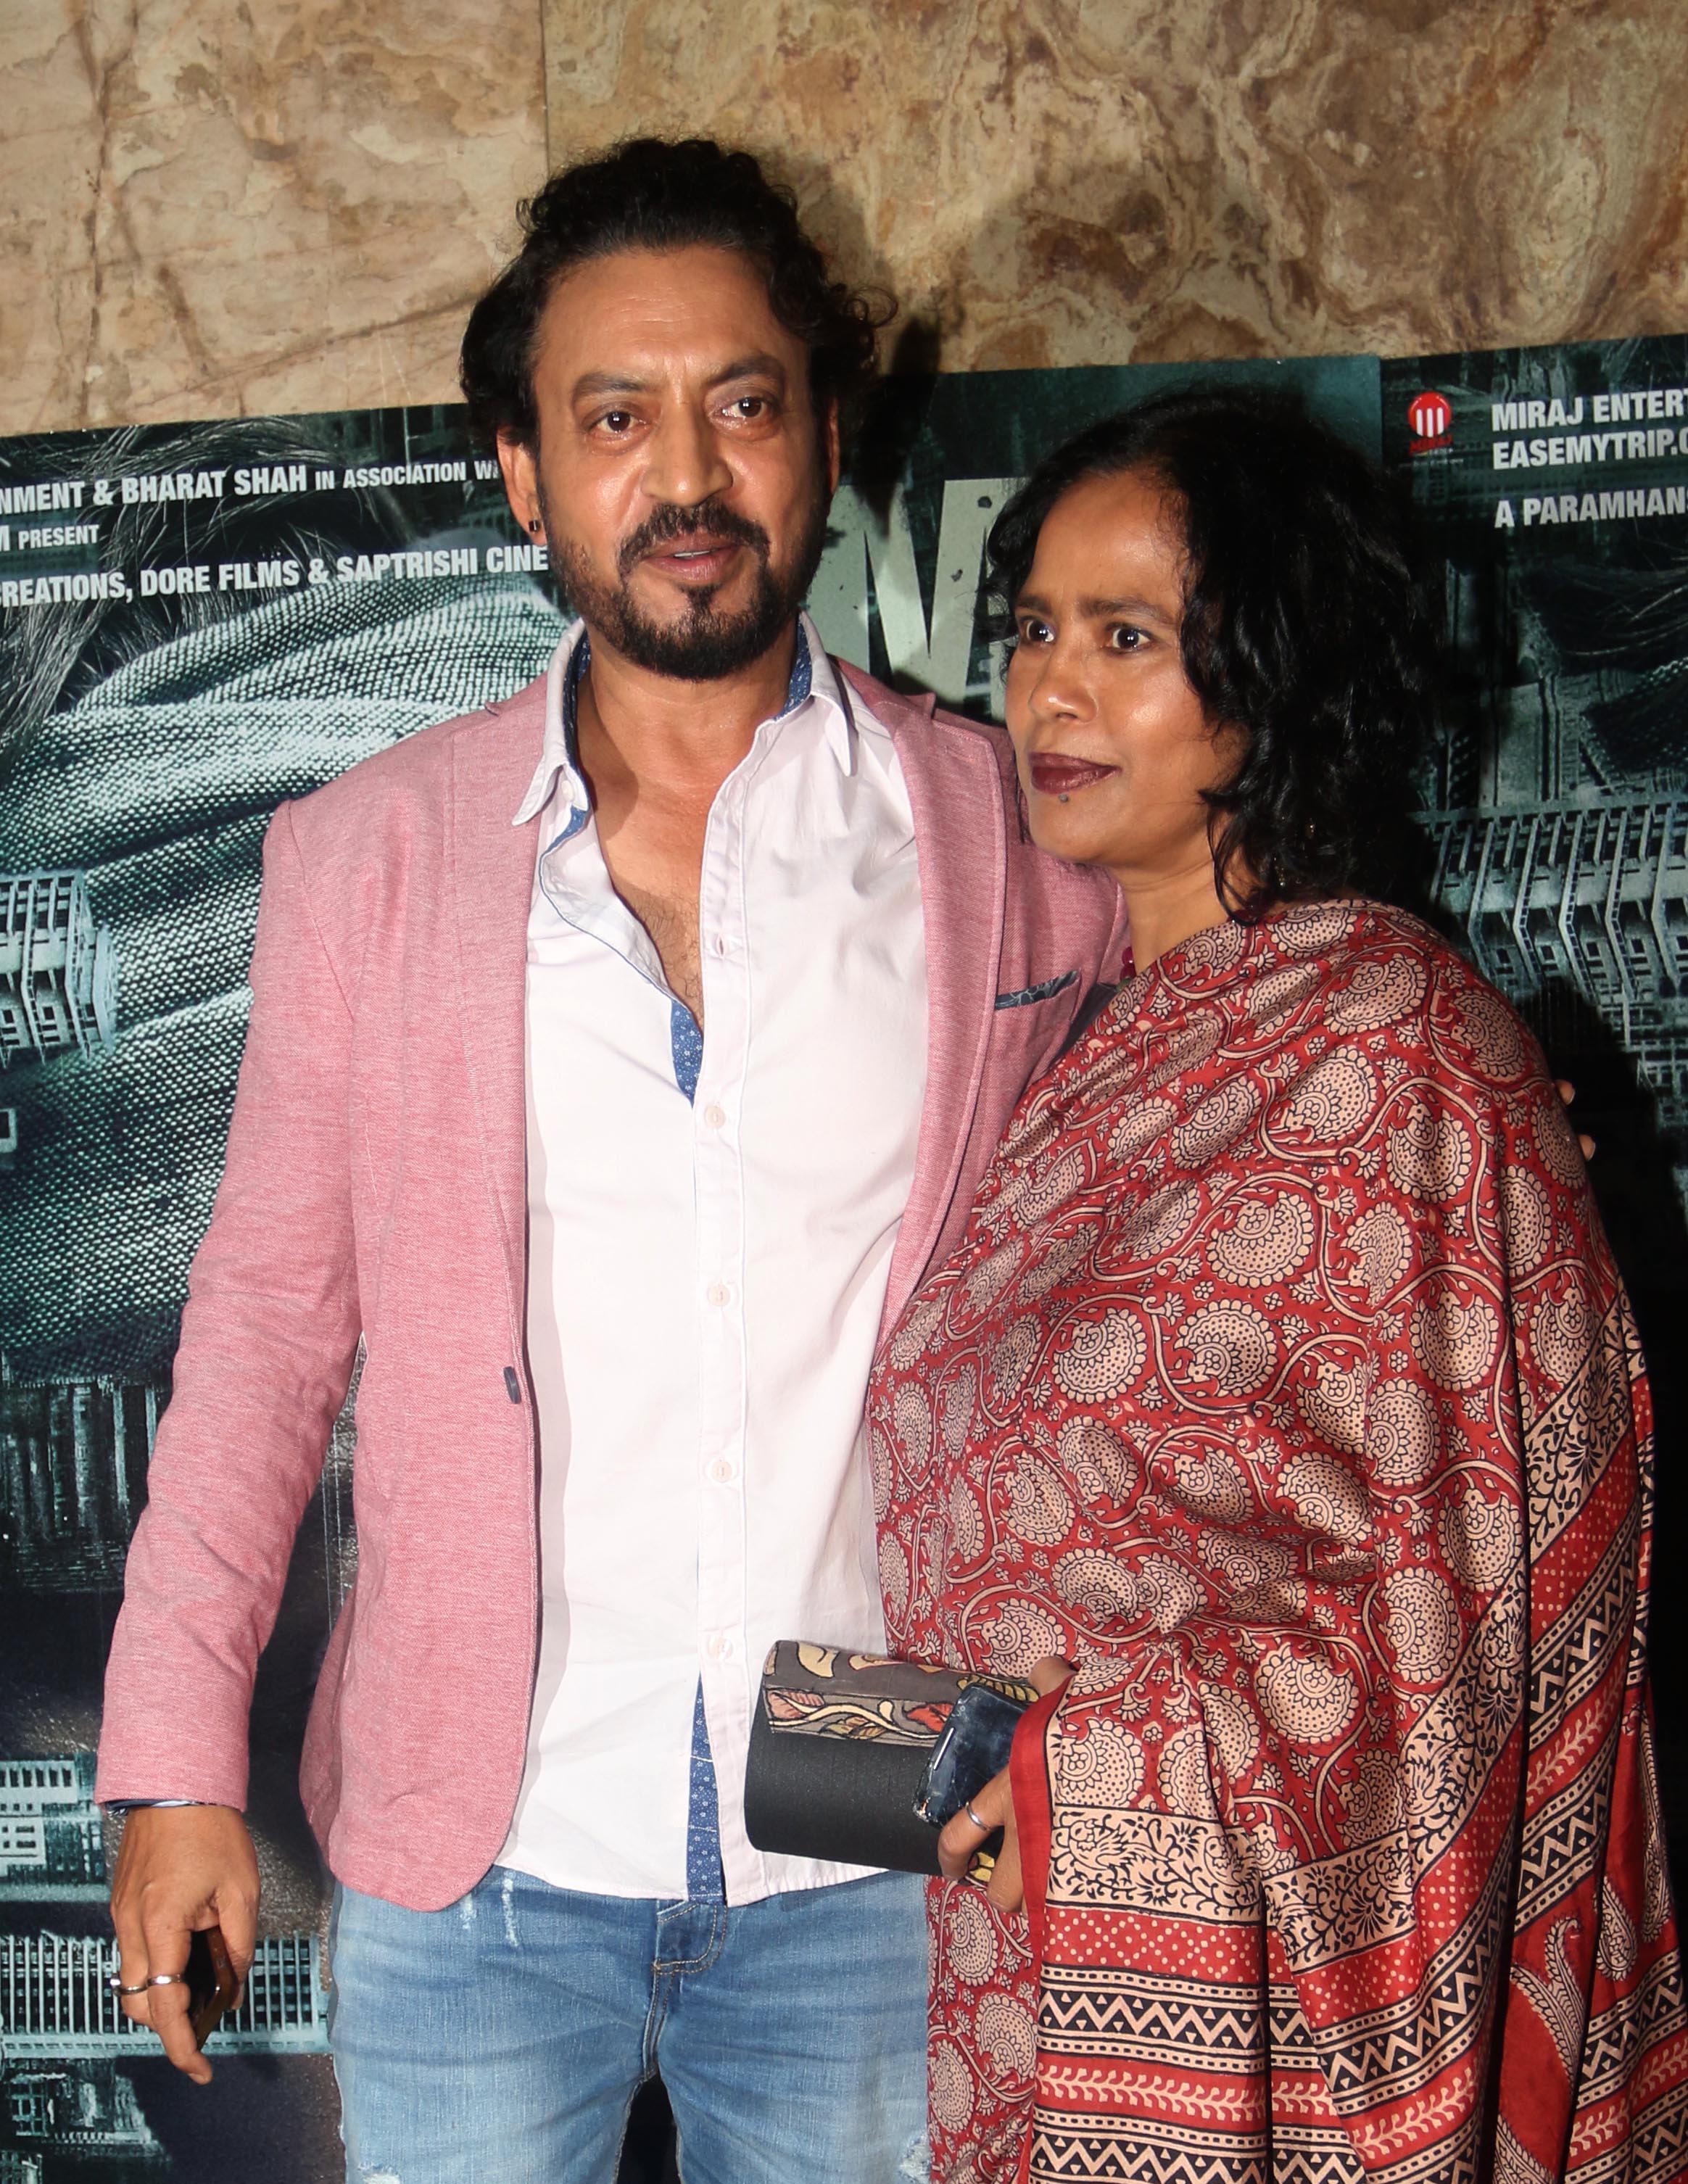 Sutapa Sikdar Irrfan Khans Wife 5 Fast Facts You Need To Know